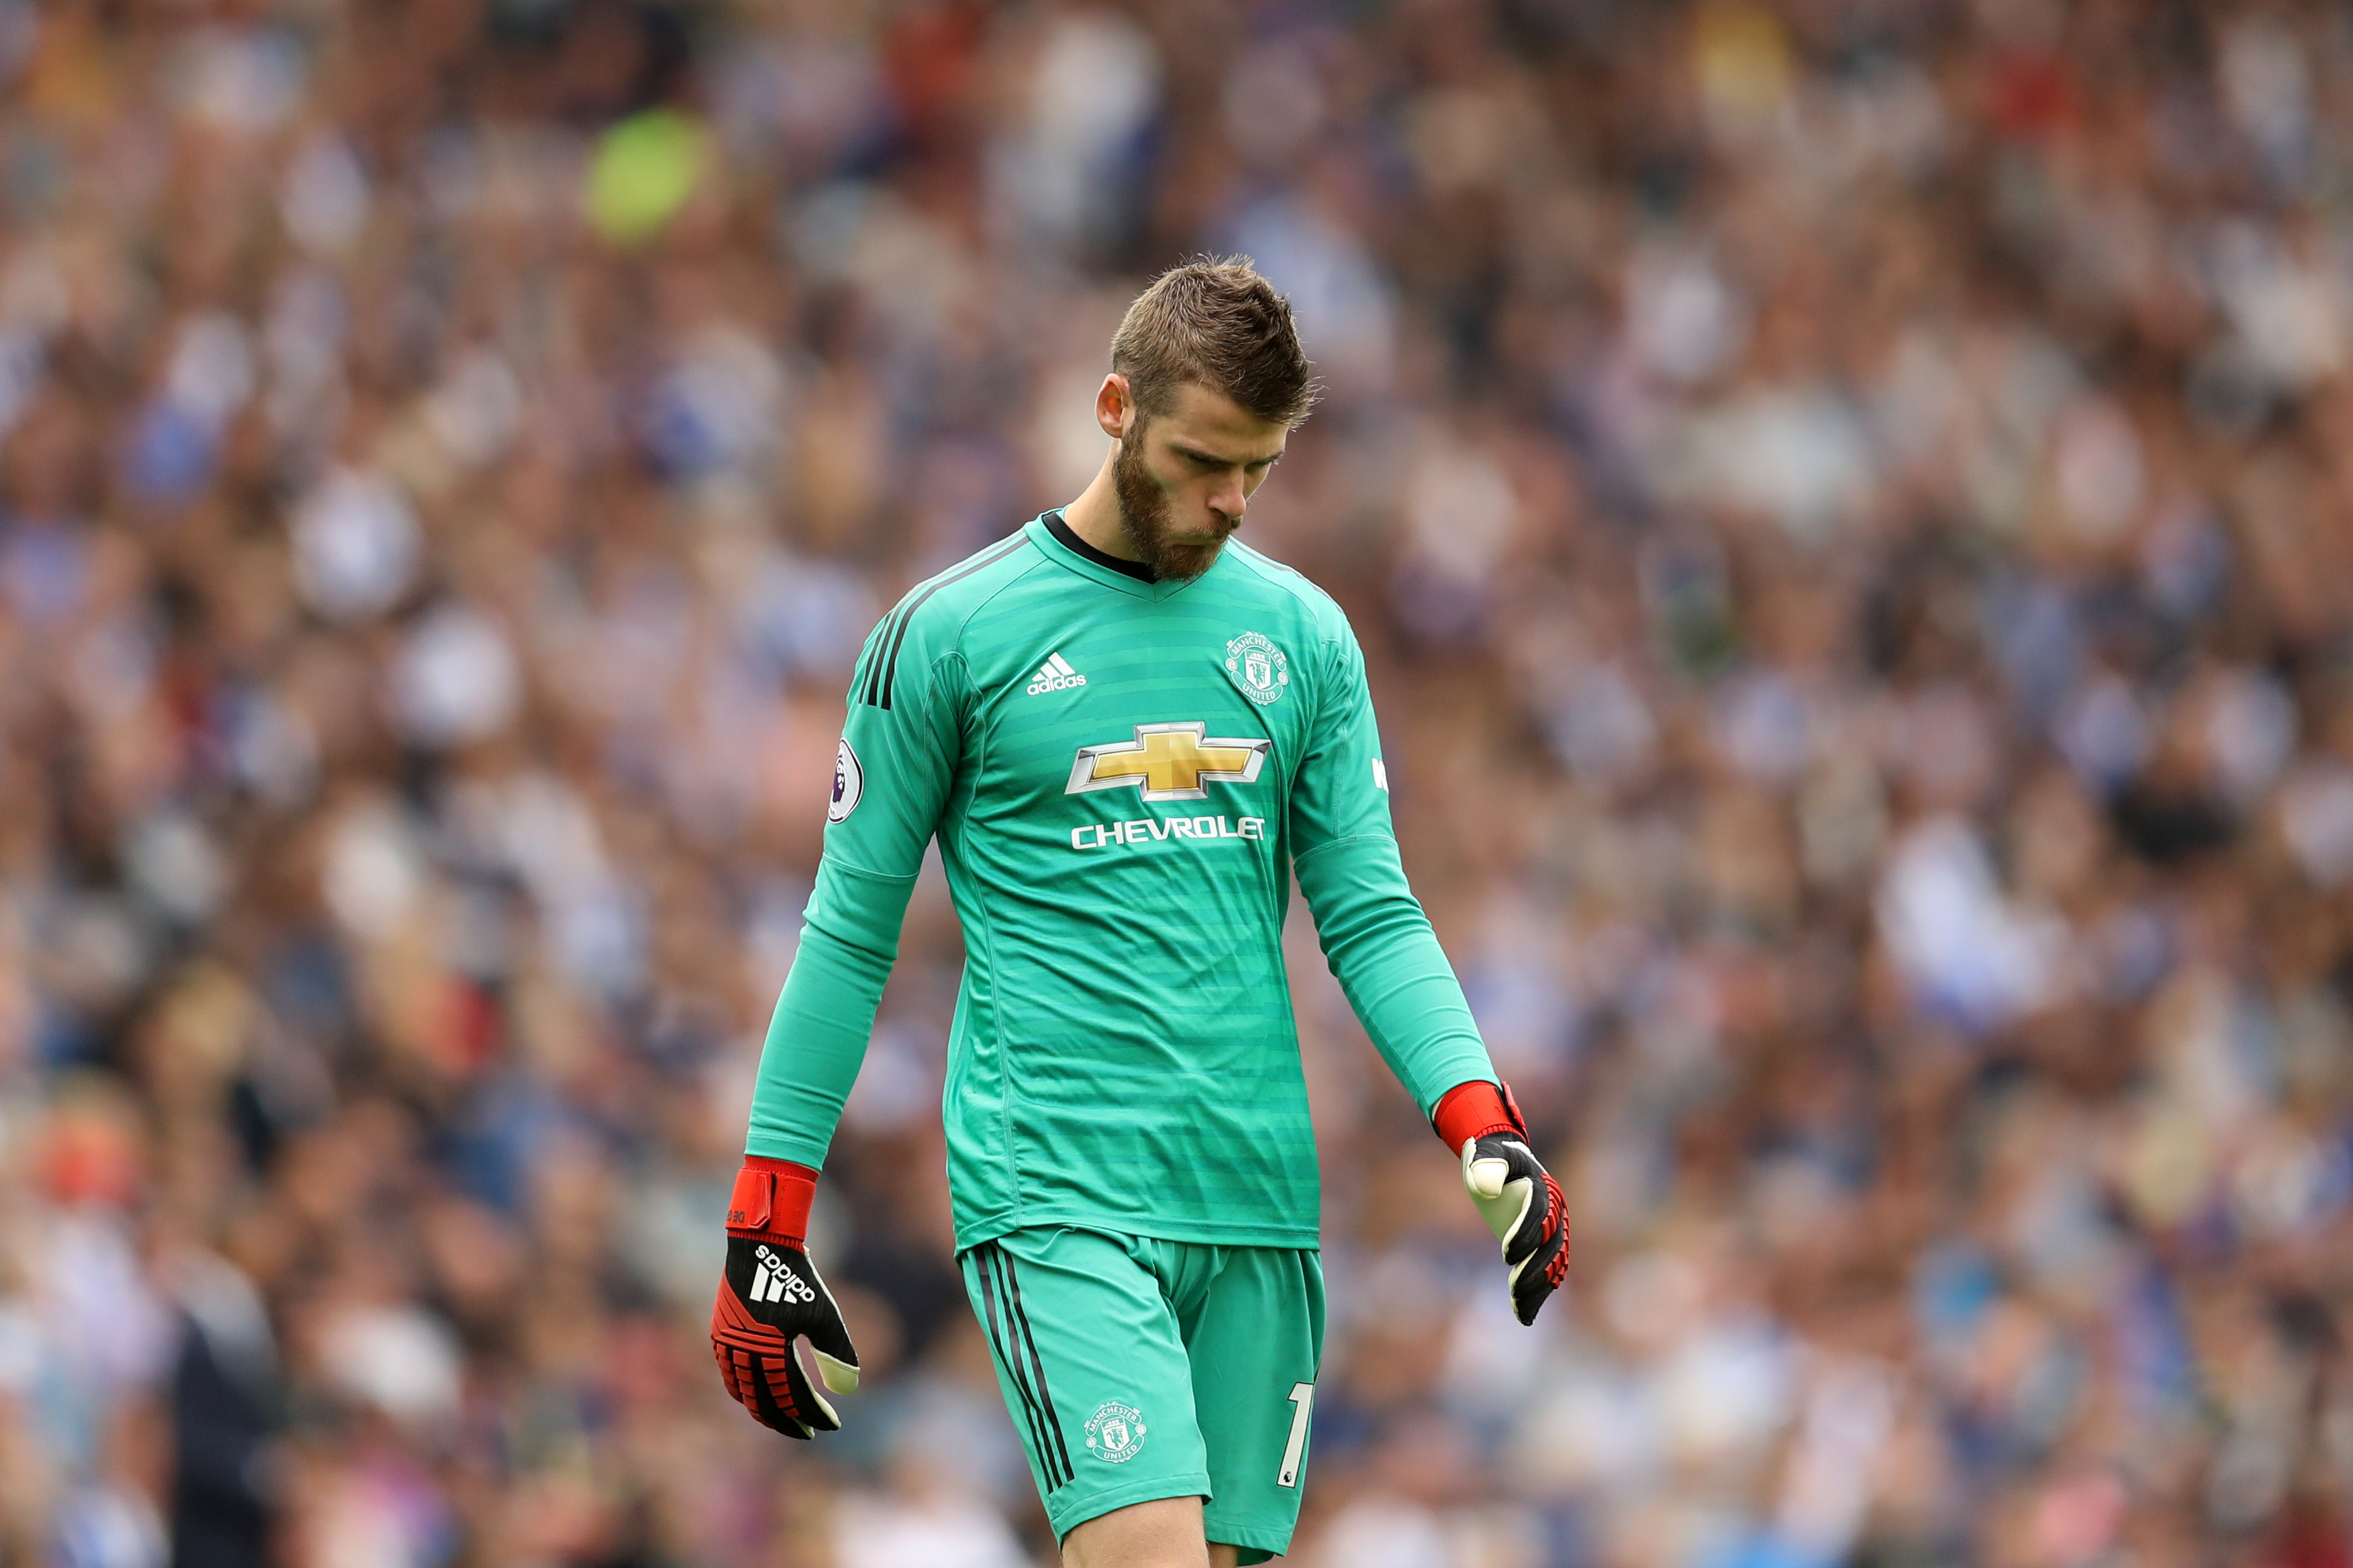 BRIGHTON, ENGLAND - AUGUST 19:  David De Gea of Manchester United reacts during the Premier League match between Brighton & Hove Albion and Manchester United at American Express Community Stadium on August 19, 2018 in Brighton, United Kingdom.  (Photo by Dan Istitene/Getty Images)